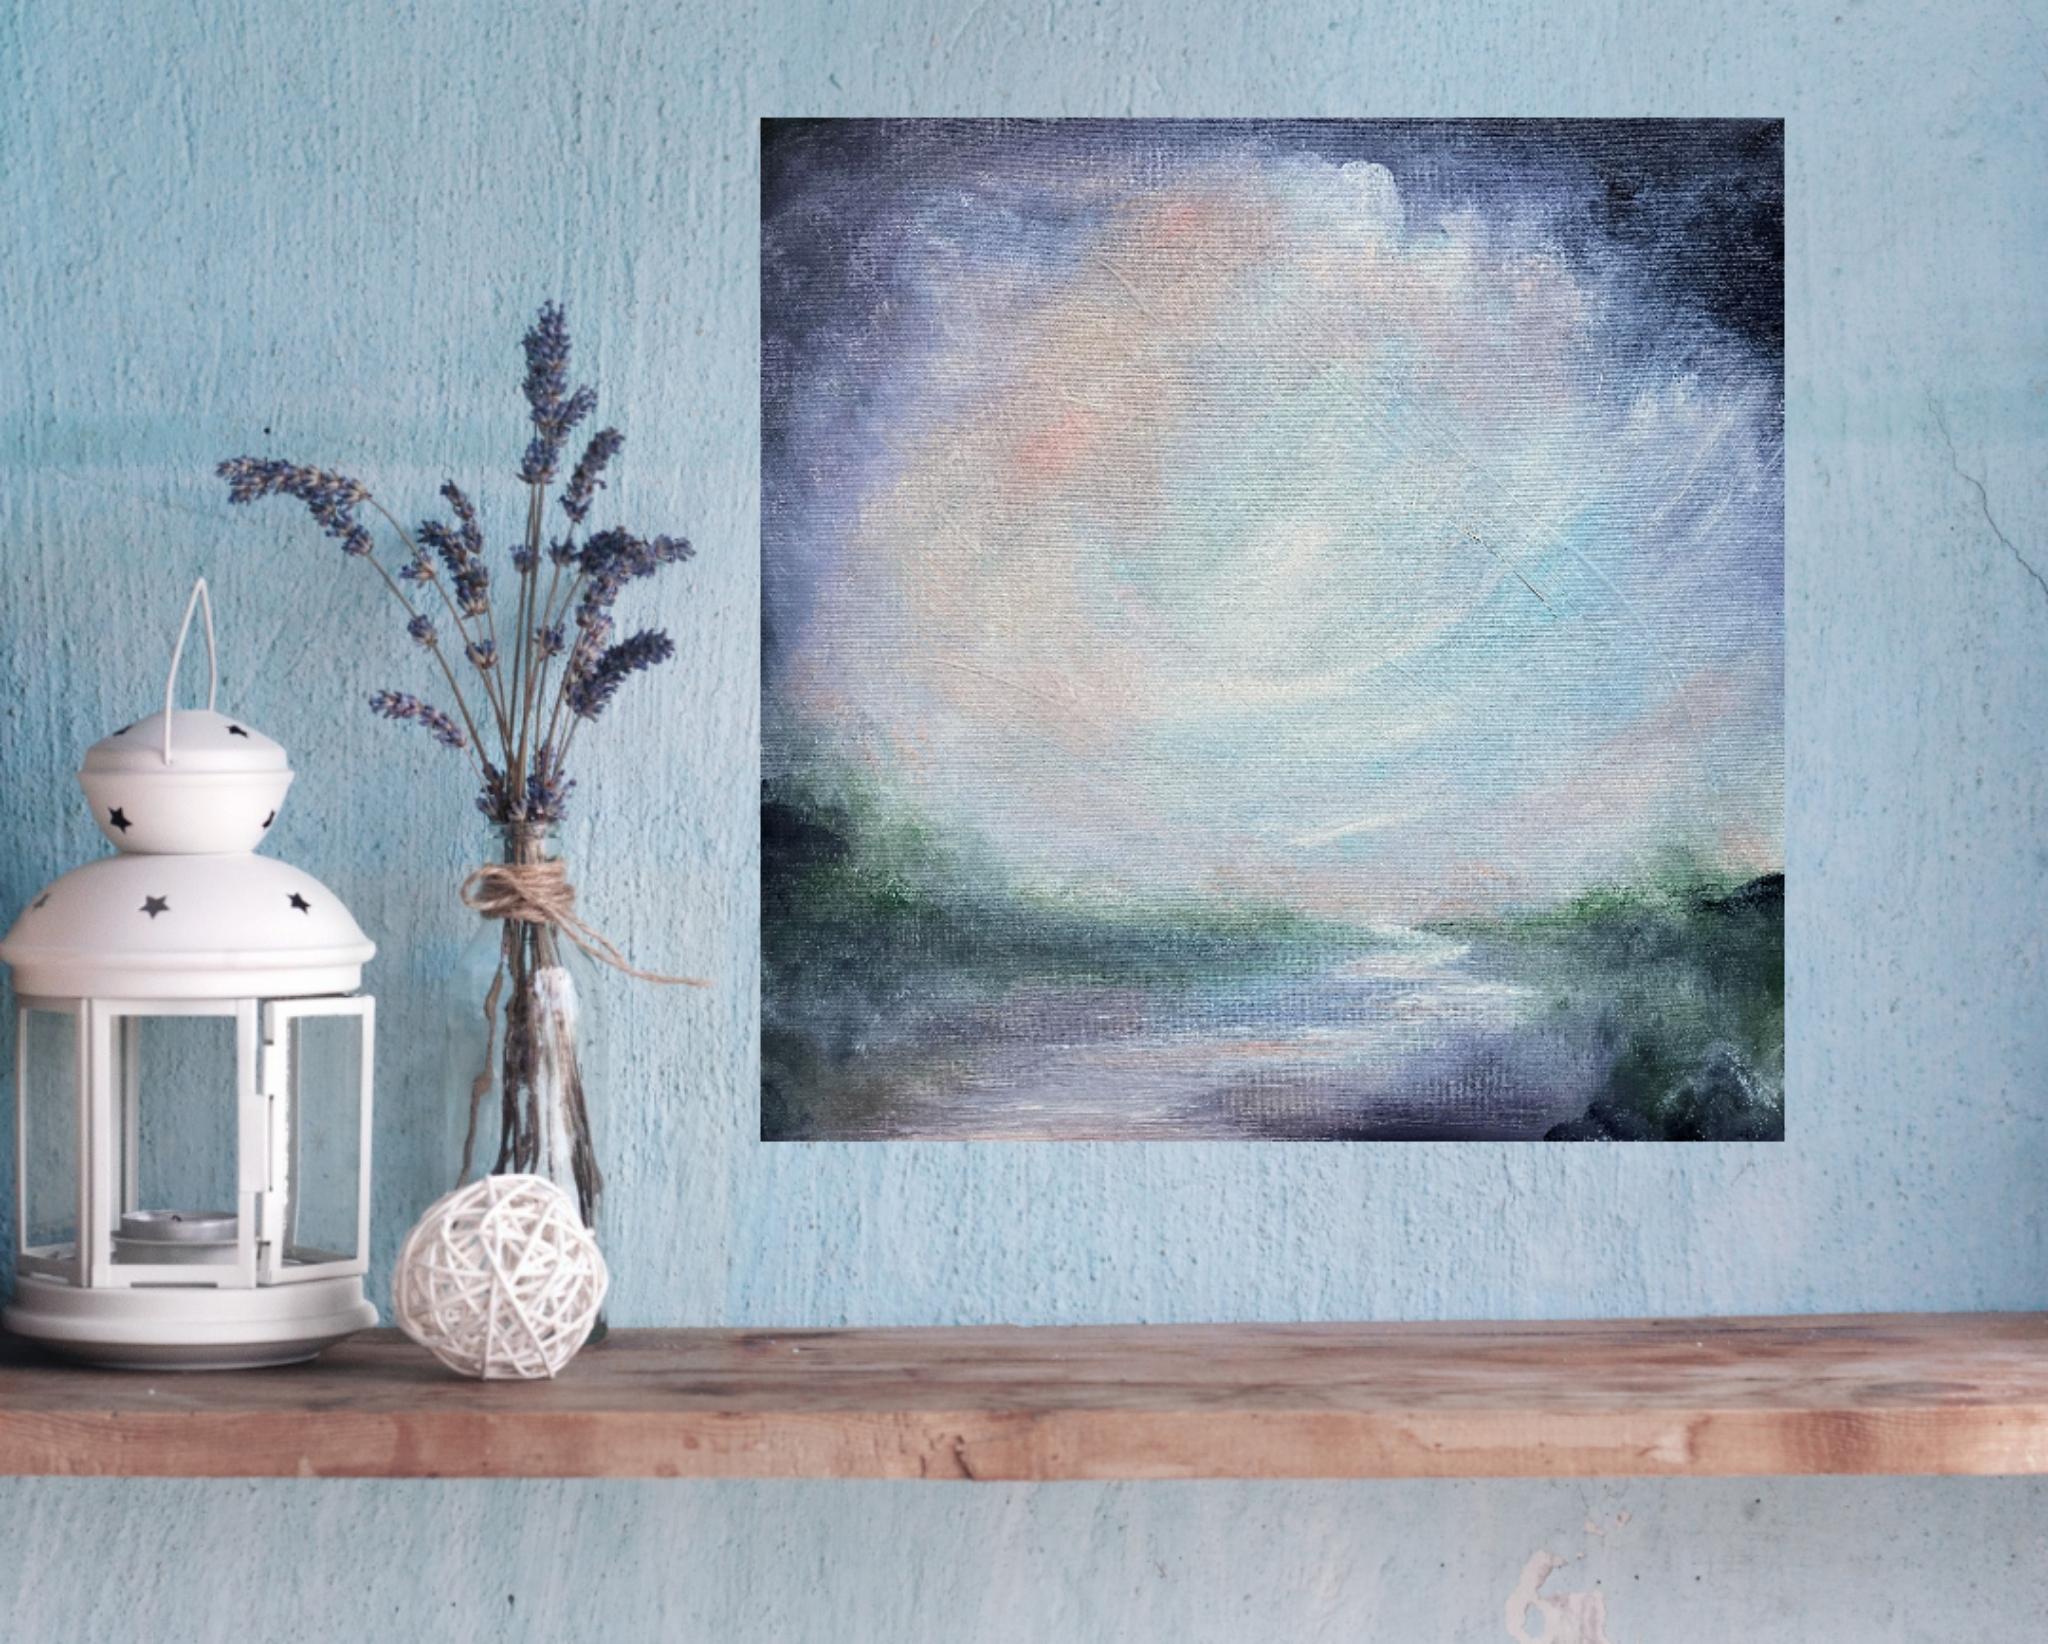 Nocturne is a soft abstract landscape painting dedicated to the coming of night, the turning of time, the river flowing. The river of time running through it. The light in this painting is ephemeral, and I feel a sense of the coming of day or the